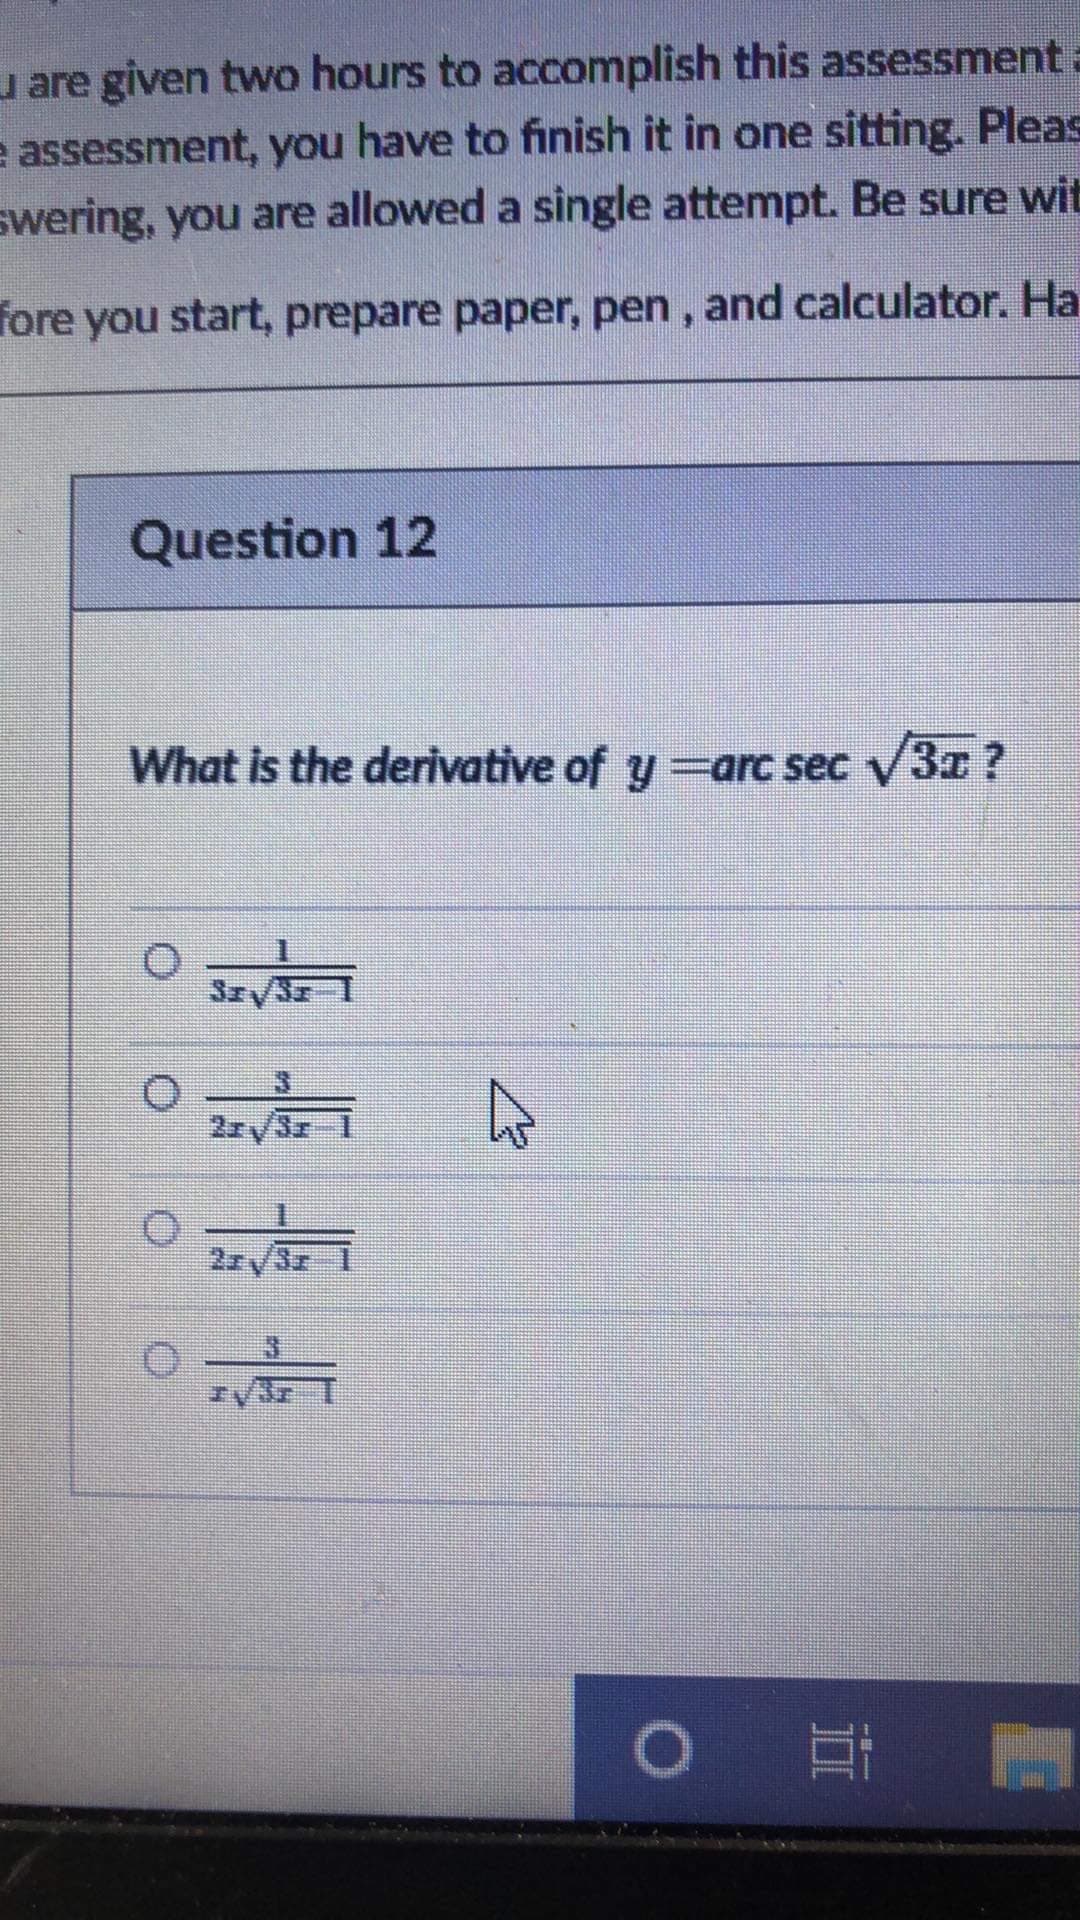 u are given two hours to accomplish this assessment:
e assessment, you have to finish it in one sitting. Pleas
swering, you are allowed a single attempt. Be sure wit
fore you start, prepare paper, pen , and calculator. Ha
Question 12
What is the derivative of y=arc sec V3x ?
2r/3r
-1
2r/3r
